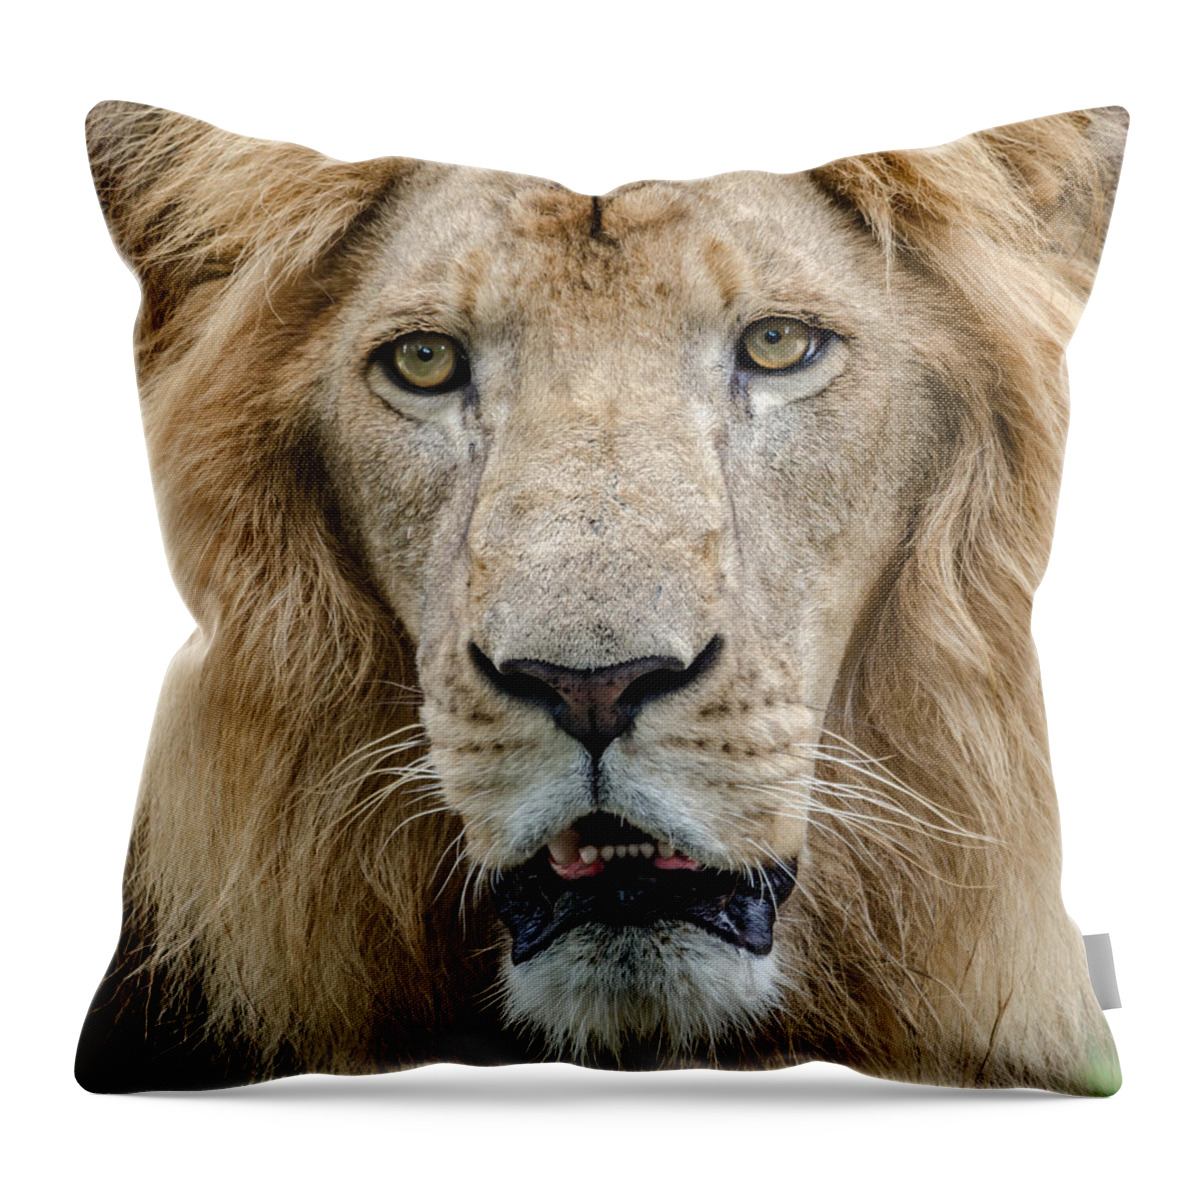 Animal Throw Pillow featuring the photograph The King by Jaime Mercado